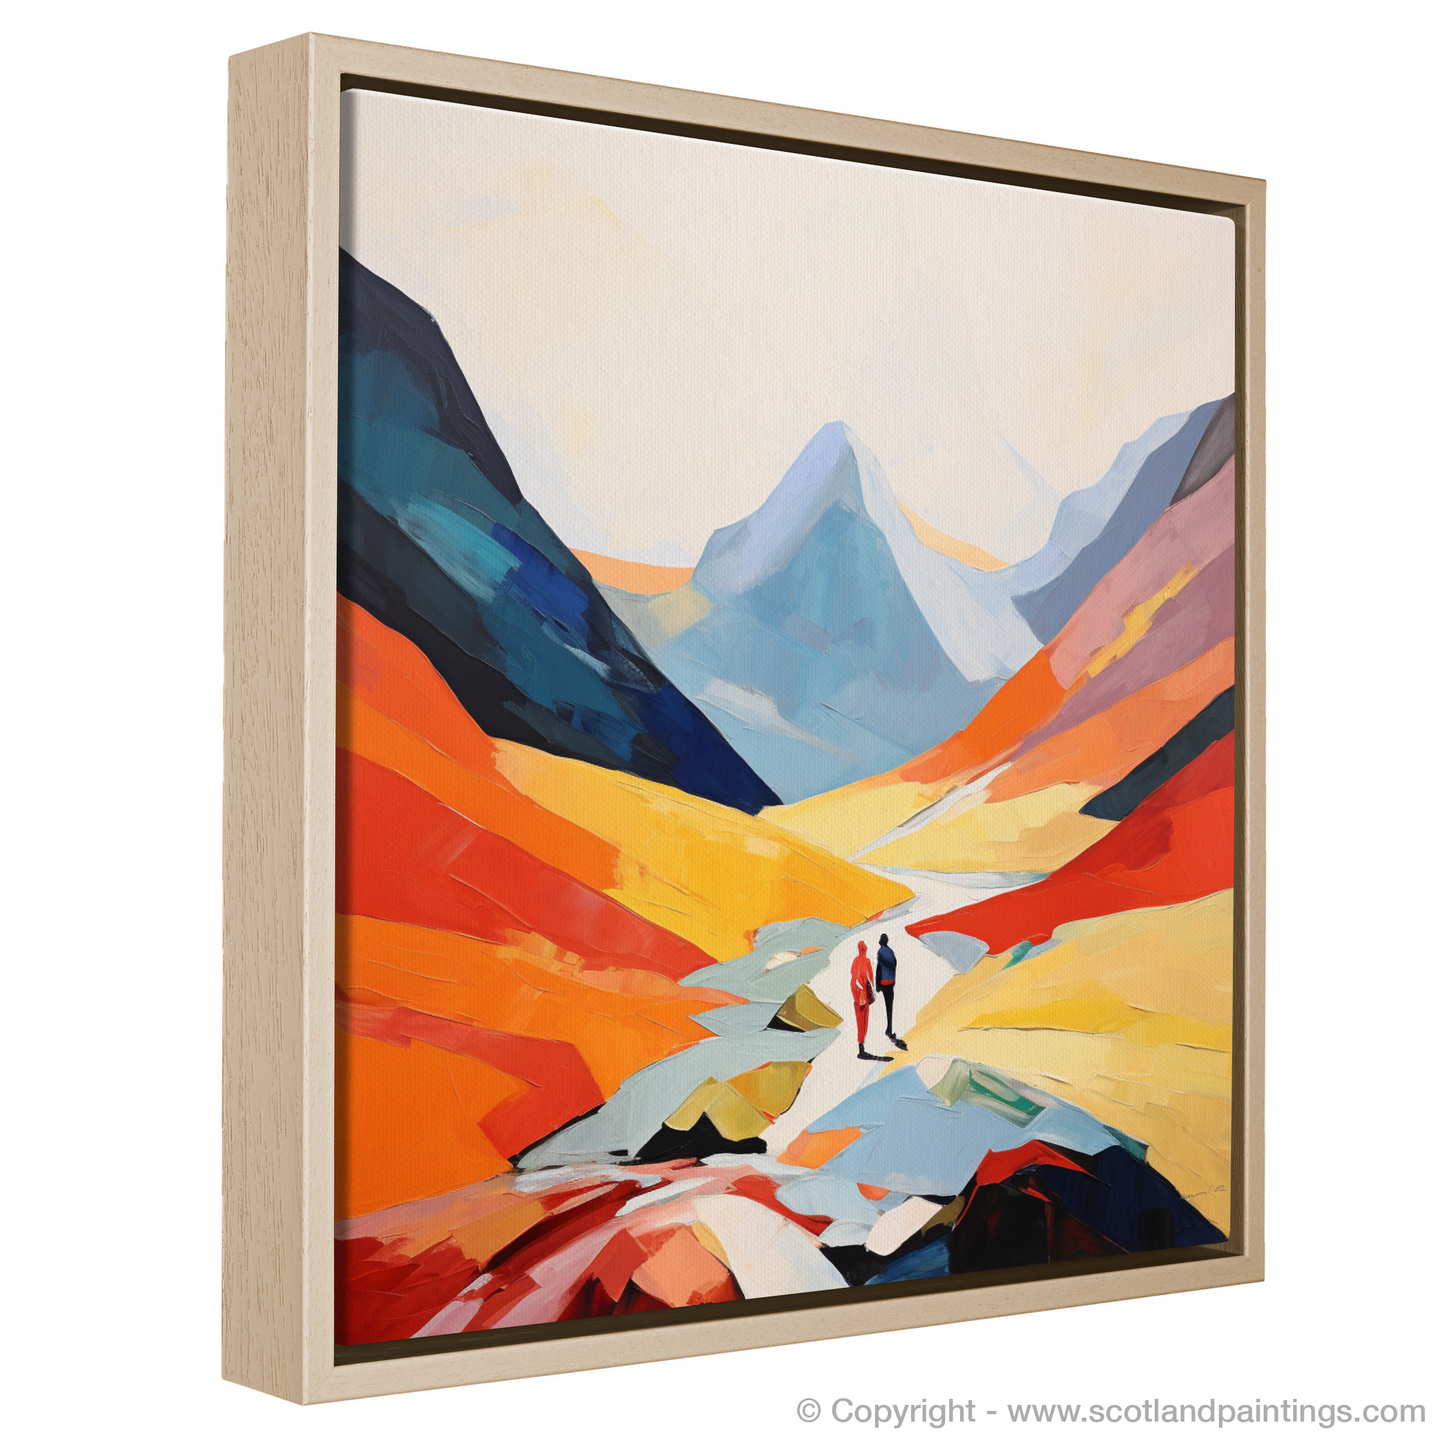 Painting and Art Print of Hikers in Glencoe entitled "Minimalist Majesty of Glencoe Hikers".